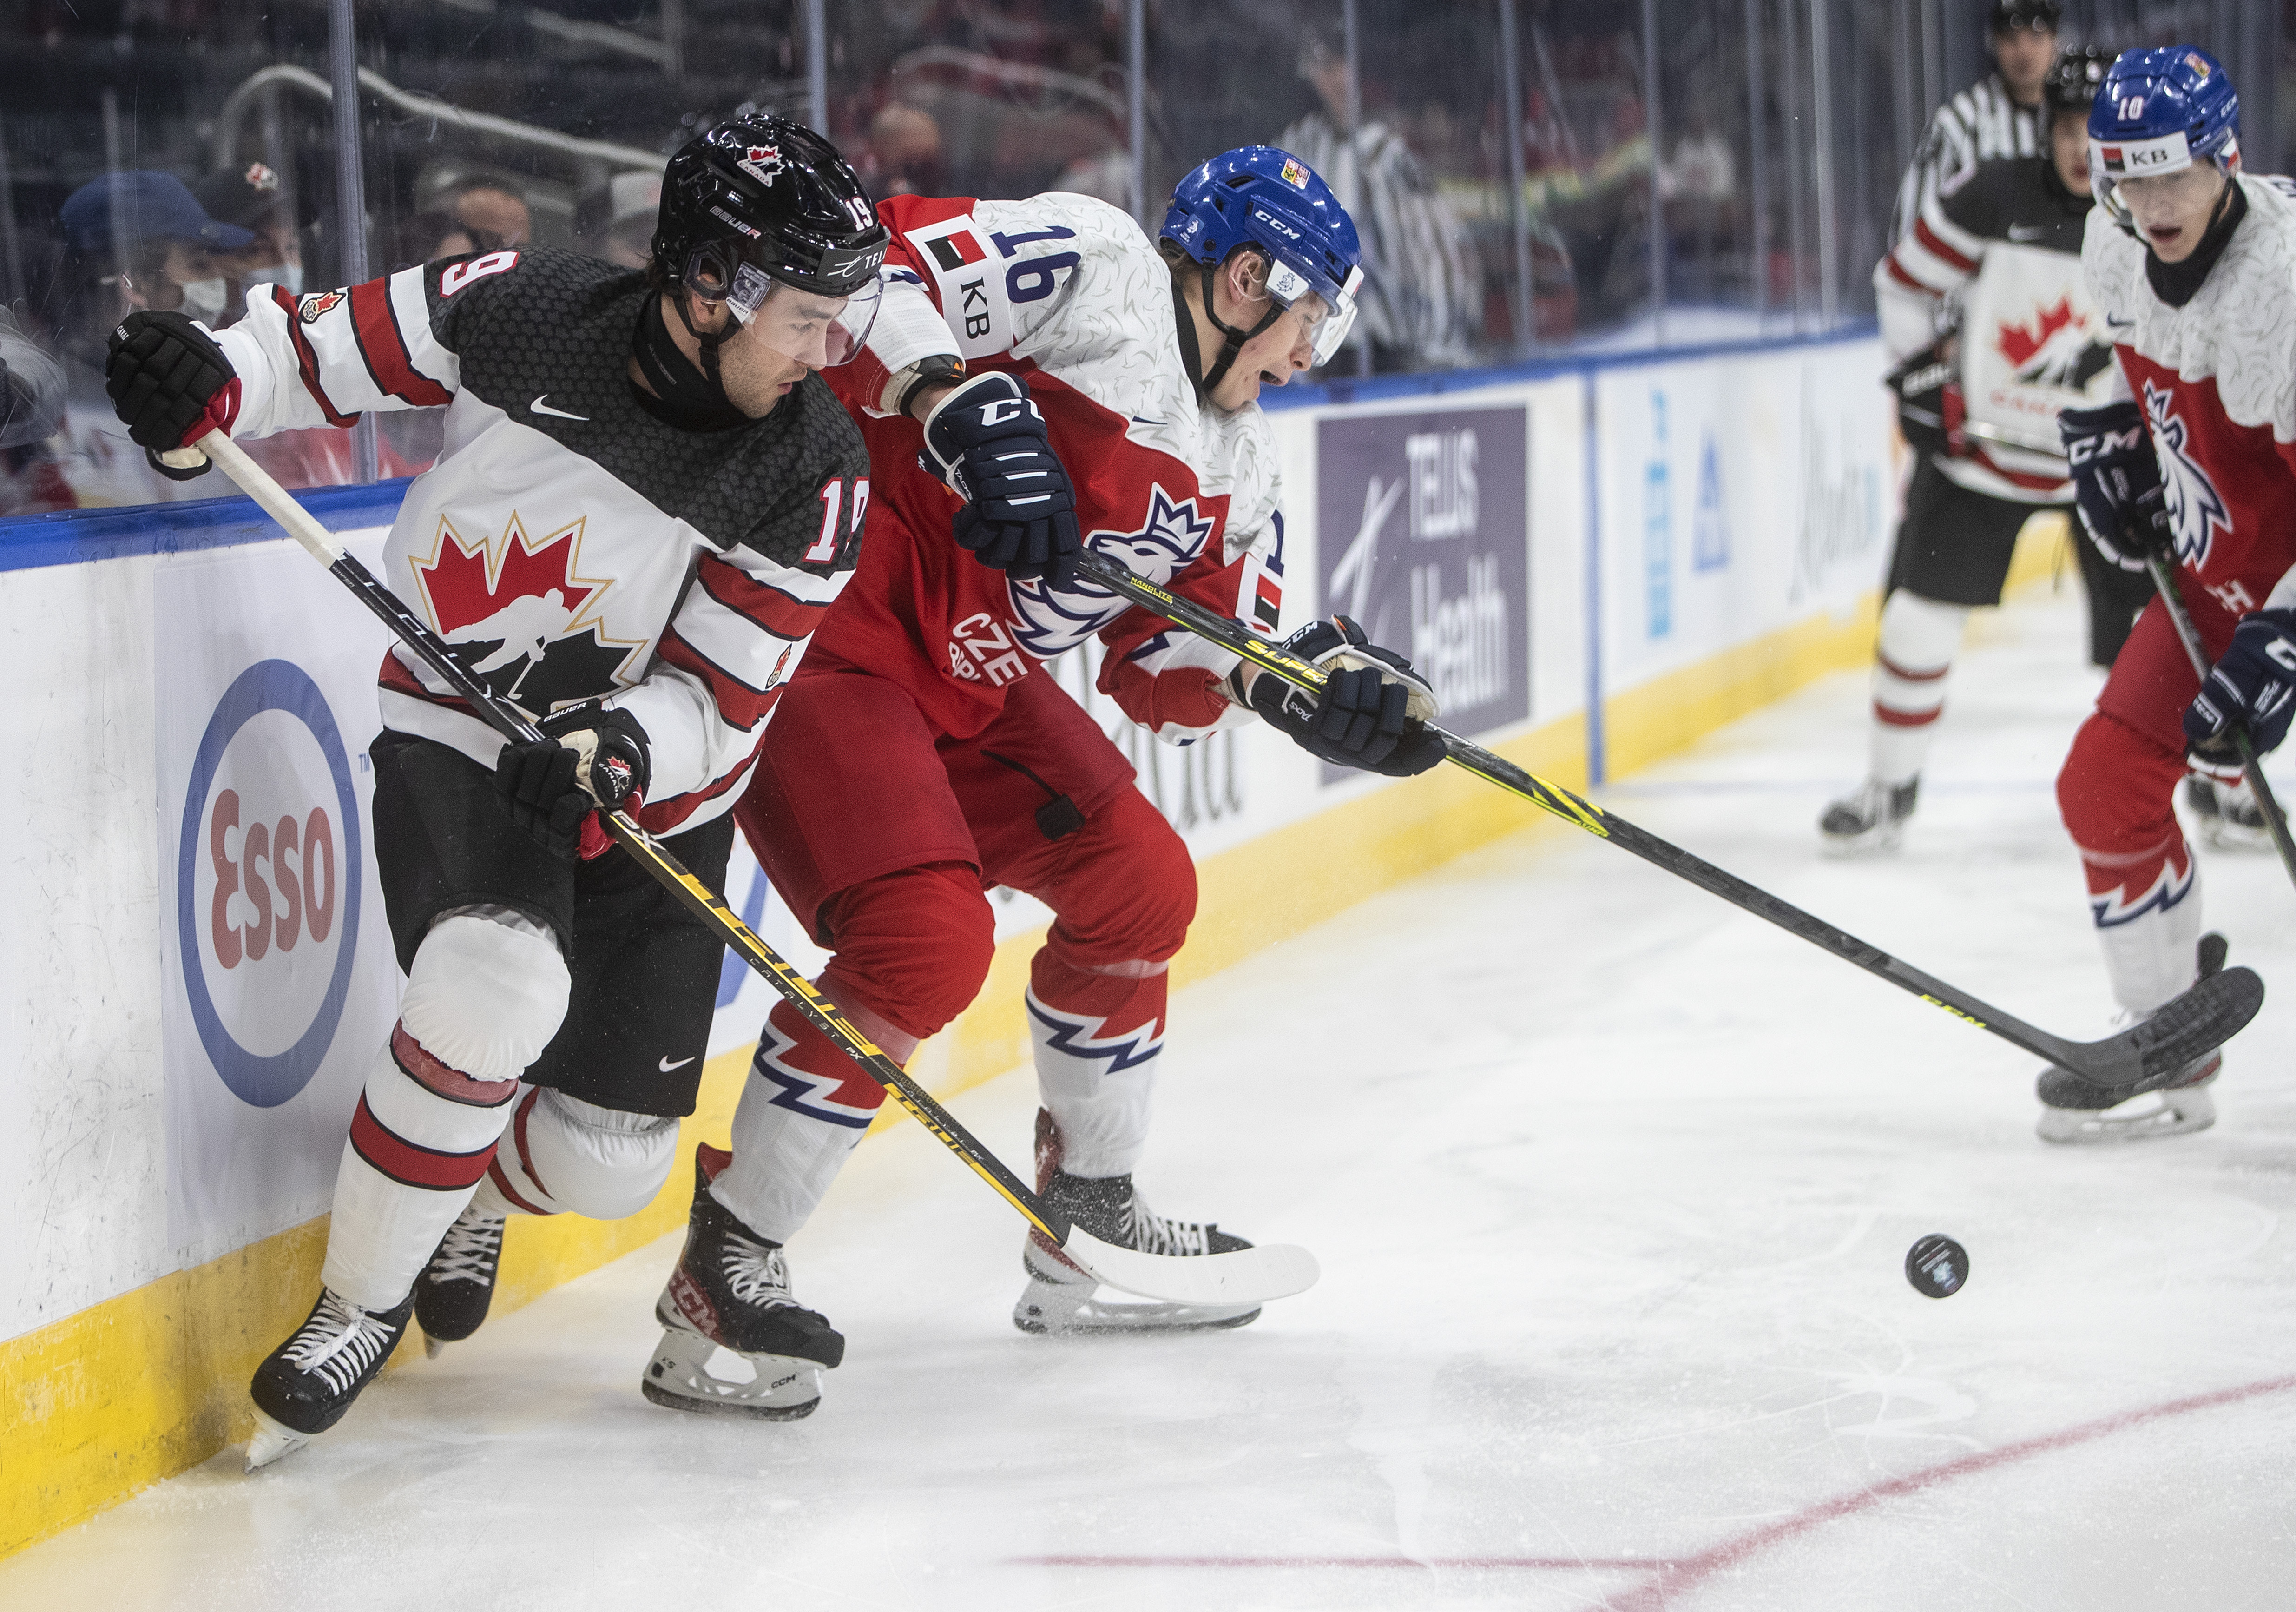 Remainder of 2022 World Juniors canceled due to rise in COVID-19 positive tests